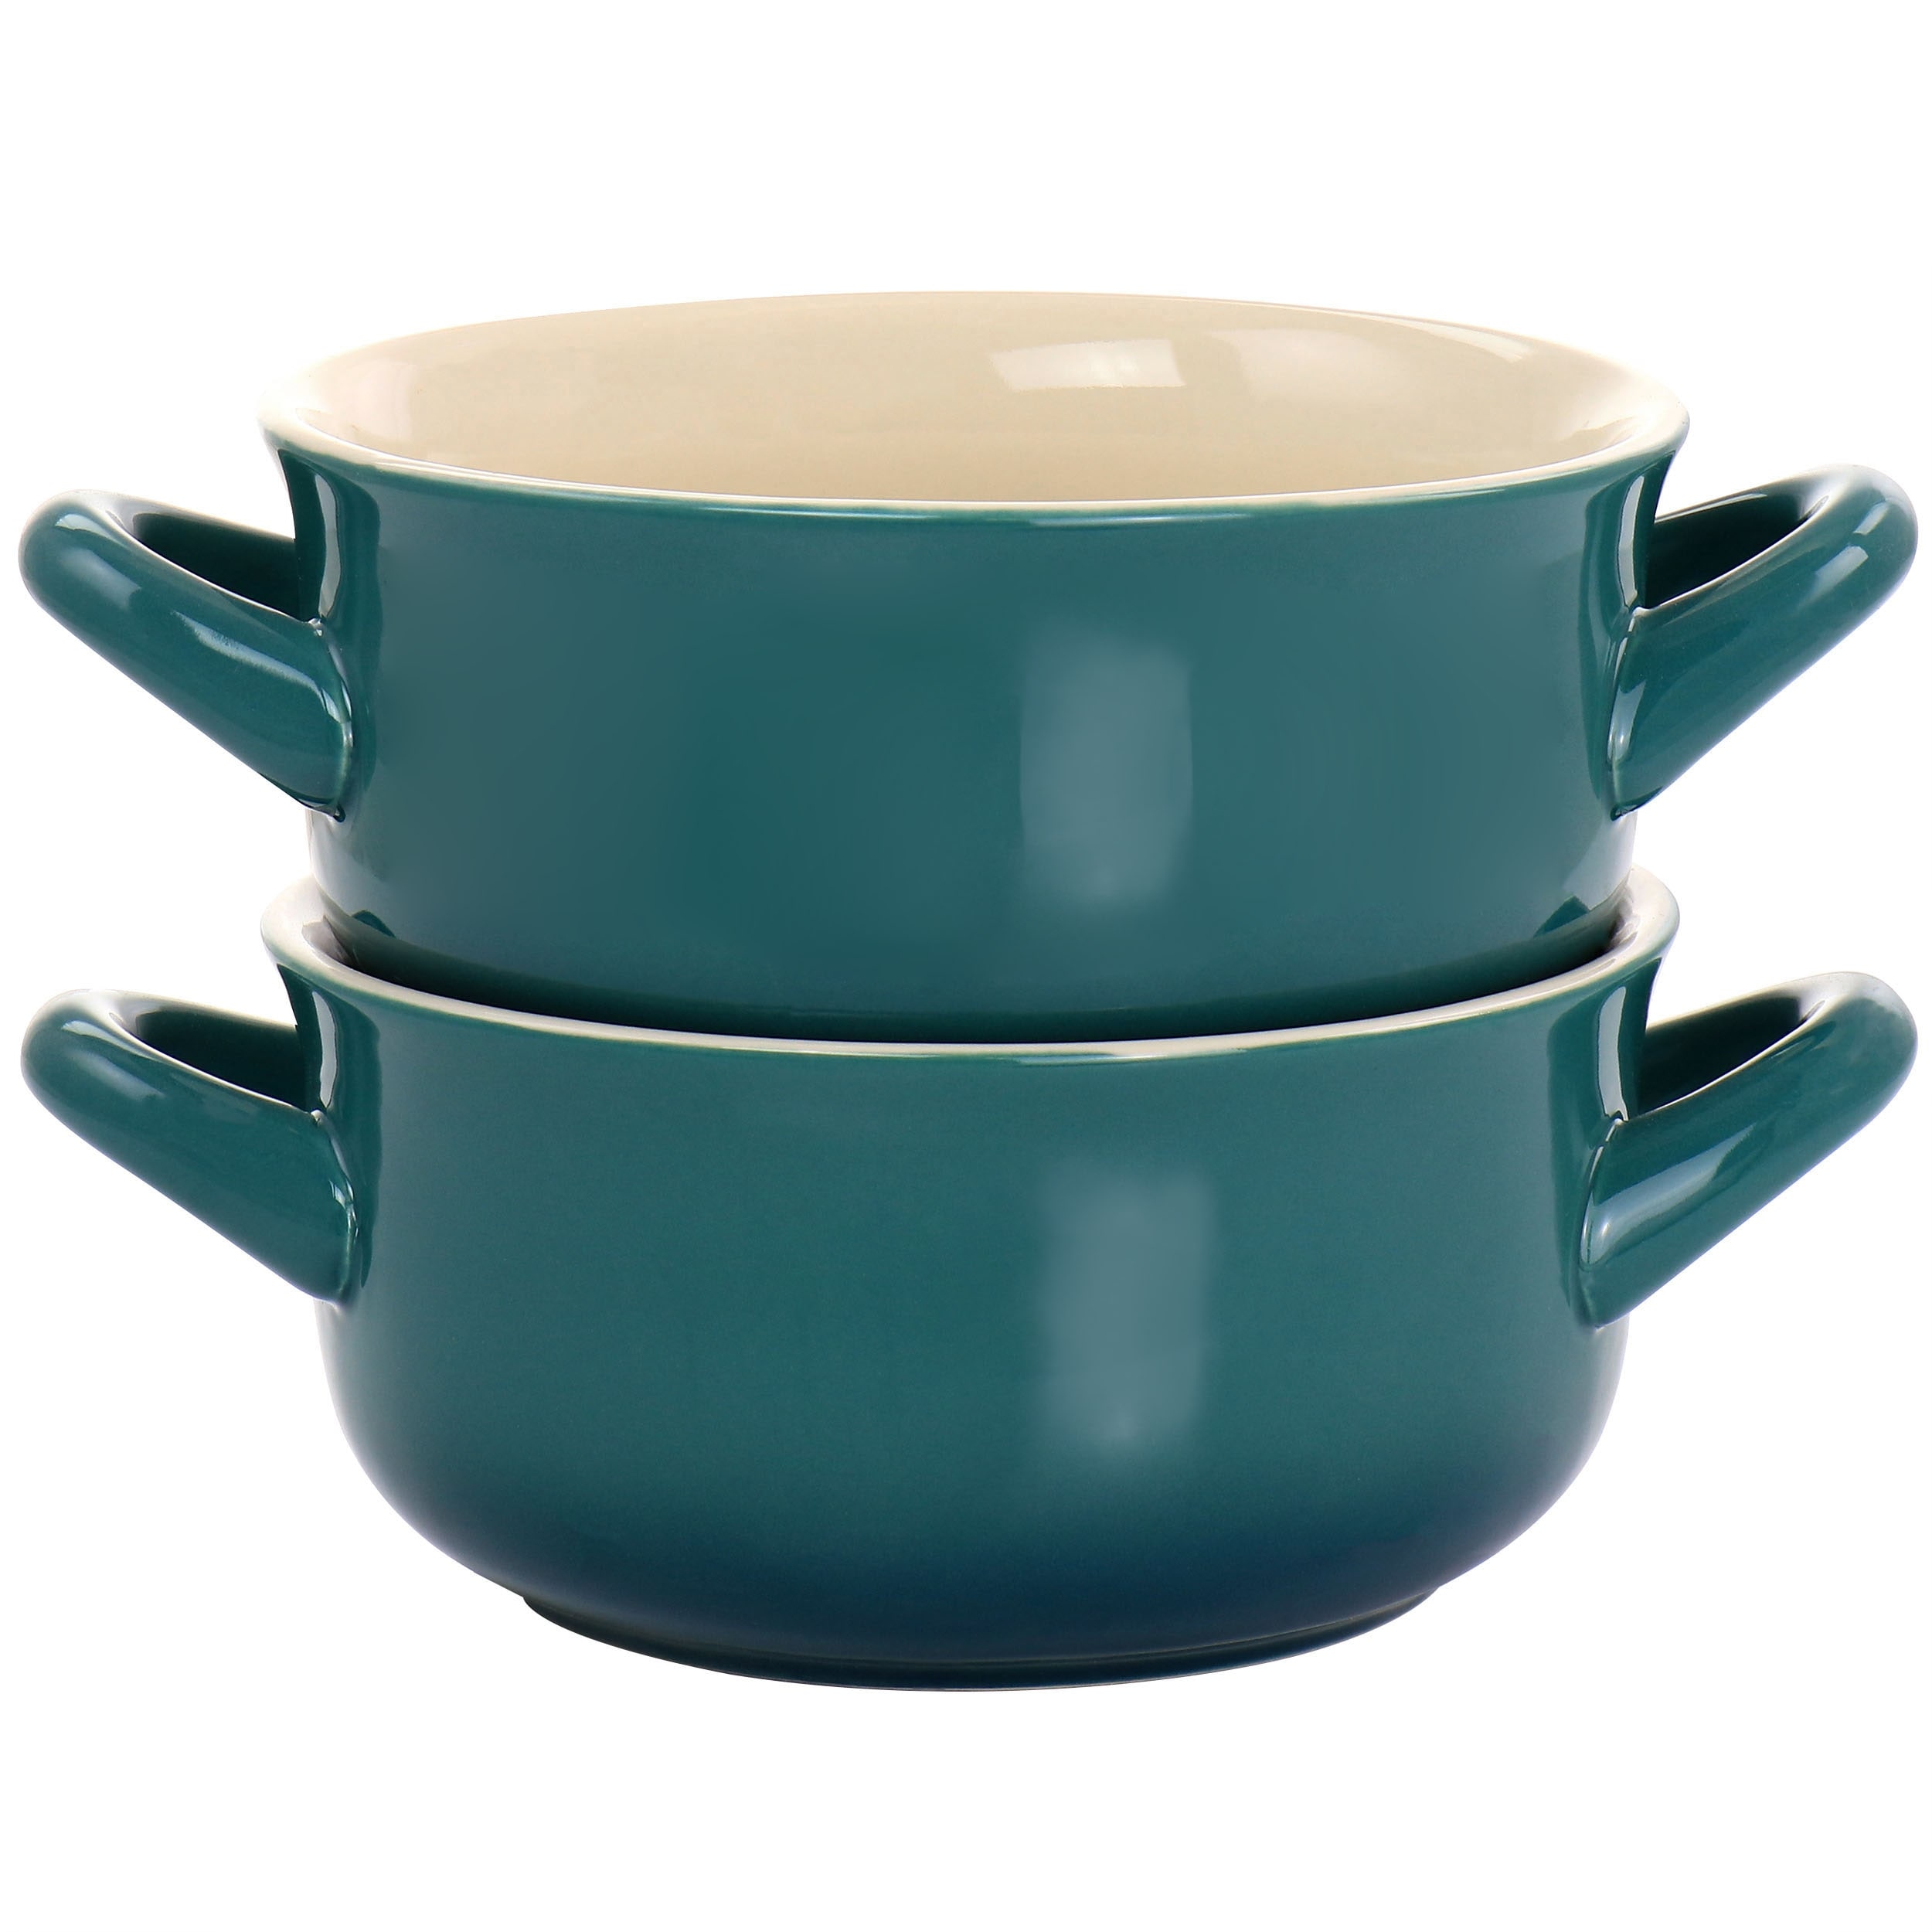 https://ak1.ostkcdn.com/images/products/is/images/direct/c432fd2b47d16dcaf0b9ee26a8982e029d84796e/Crock-Pot-2-Piece-Stoneware-30oz-Soup-Bowl-Set-with-Handles-in-Gradient-Teal.jpg